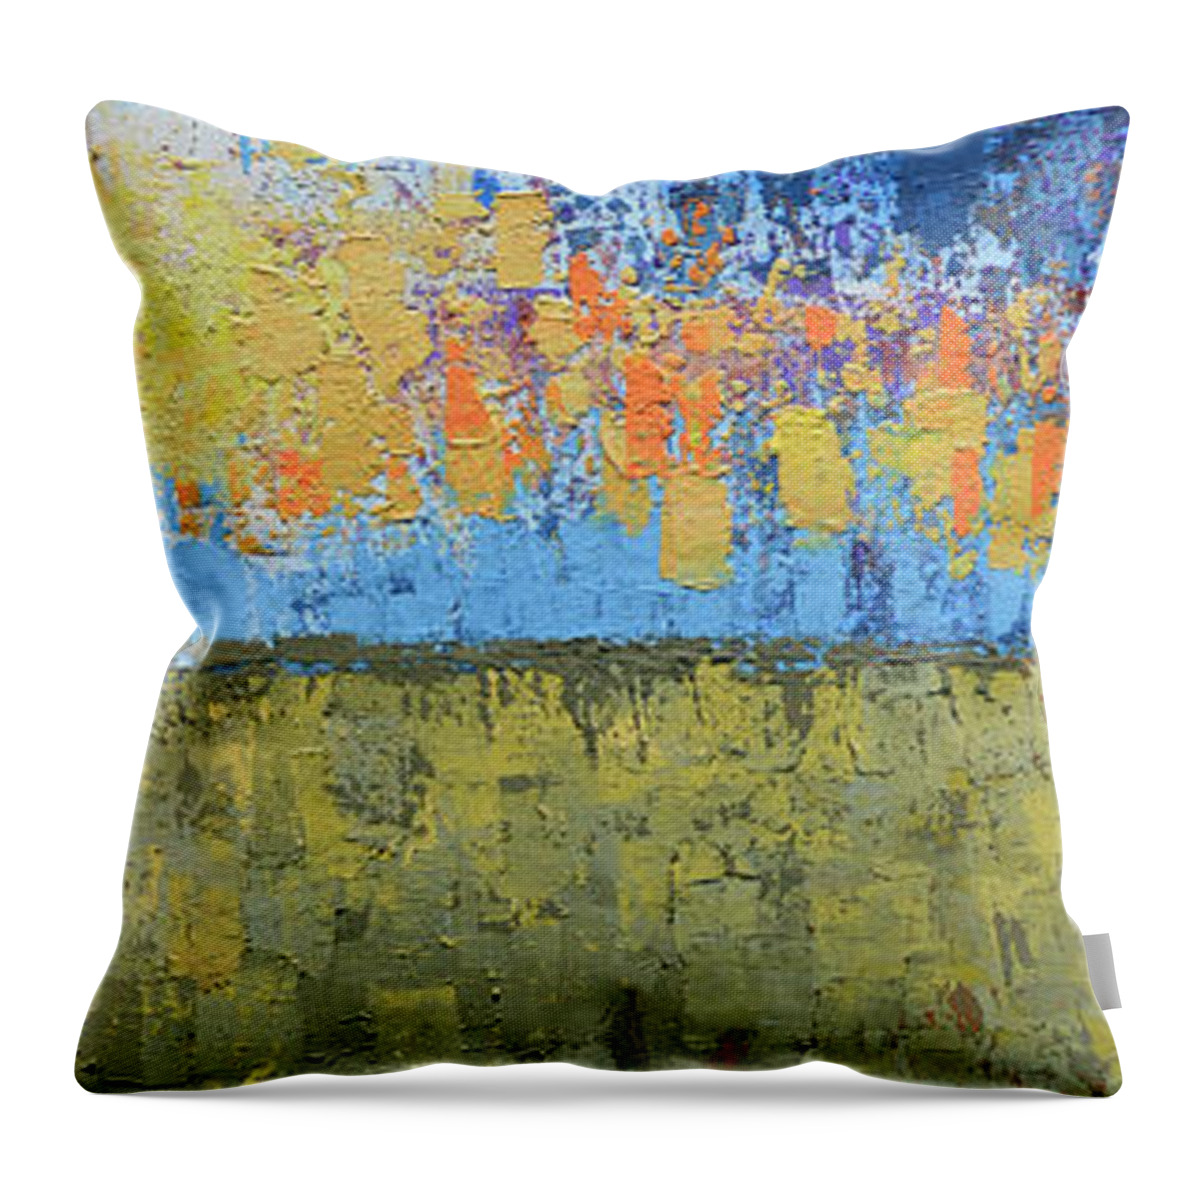  Throw Pillow featuring the painting Every Day by Linda Bailey